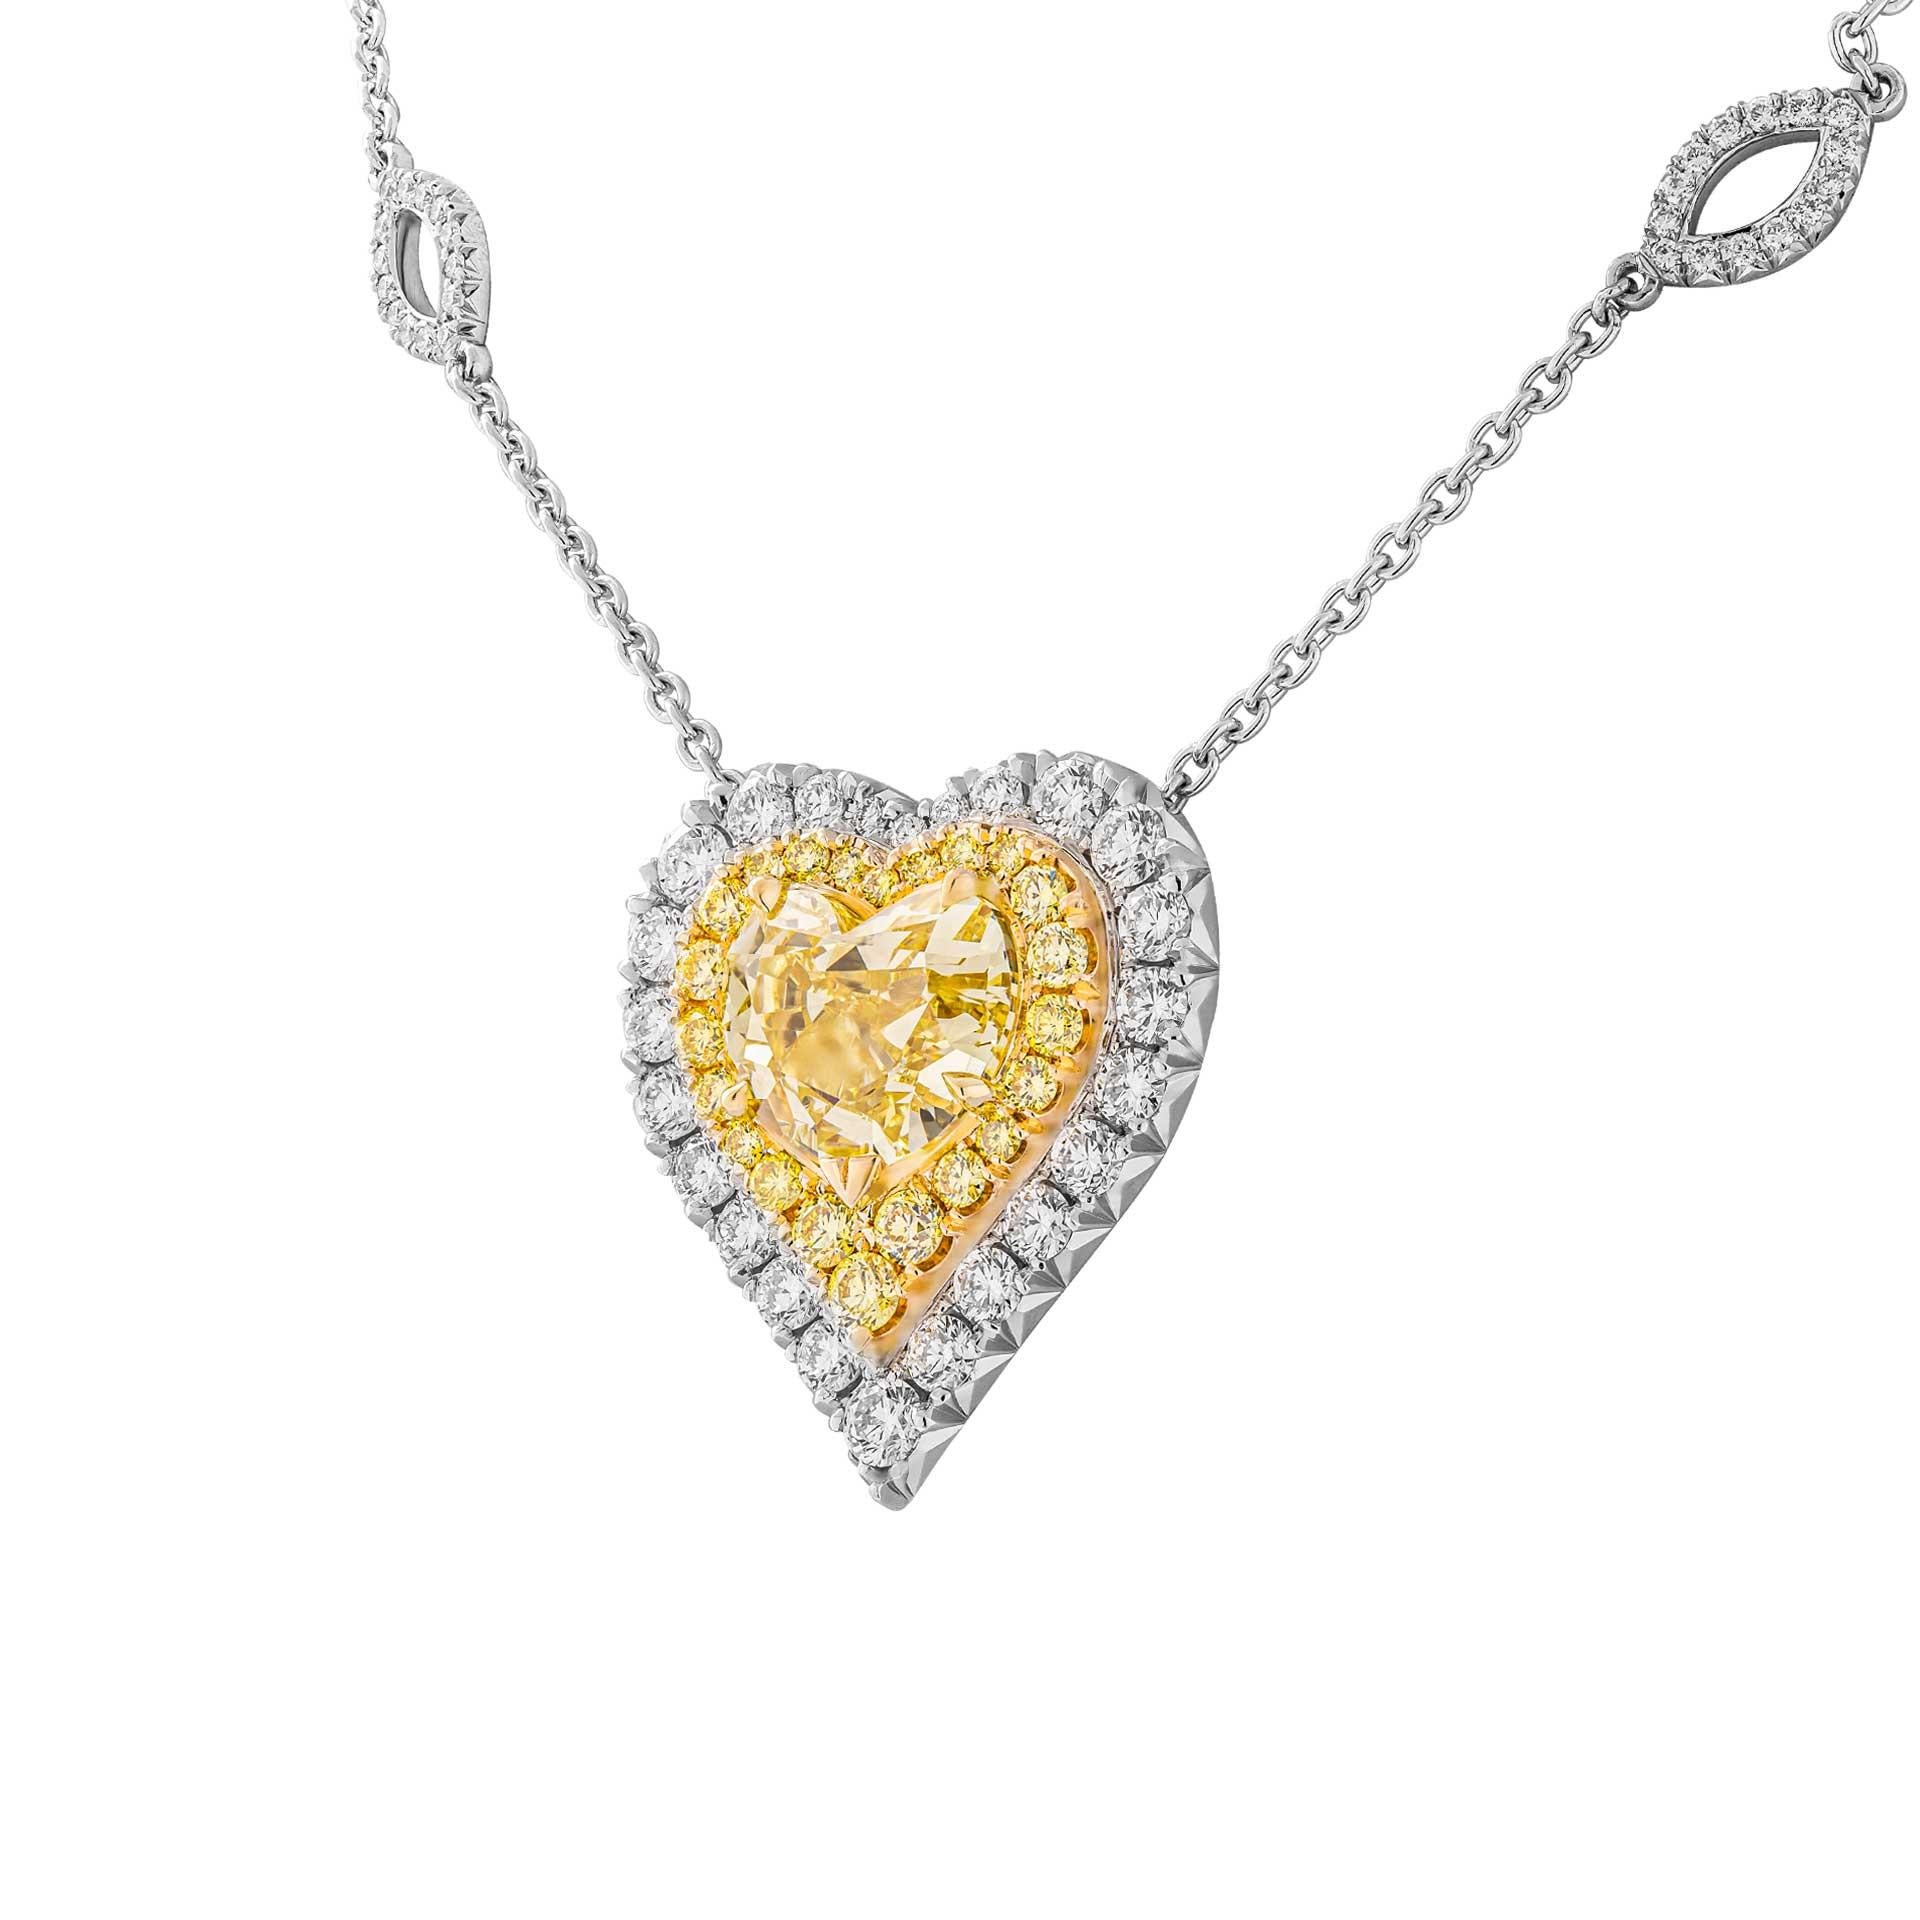 An absolute stunner!
Beautiful Heart Shape Fancy Intense Yellow Diamond Pendant with 2 rows of white & fancy yellow diamond halo around to highlight the beauty of the stone, totaling 0.73ct of fancy yellow diamonds and 2.73ct of full brilliant cut